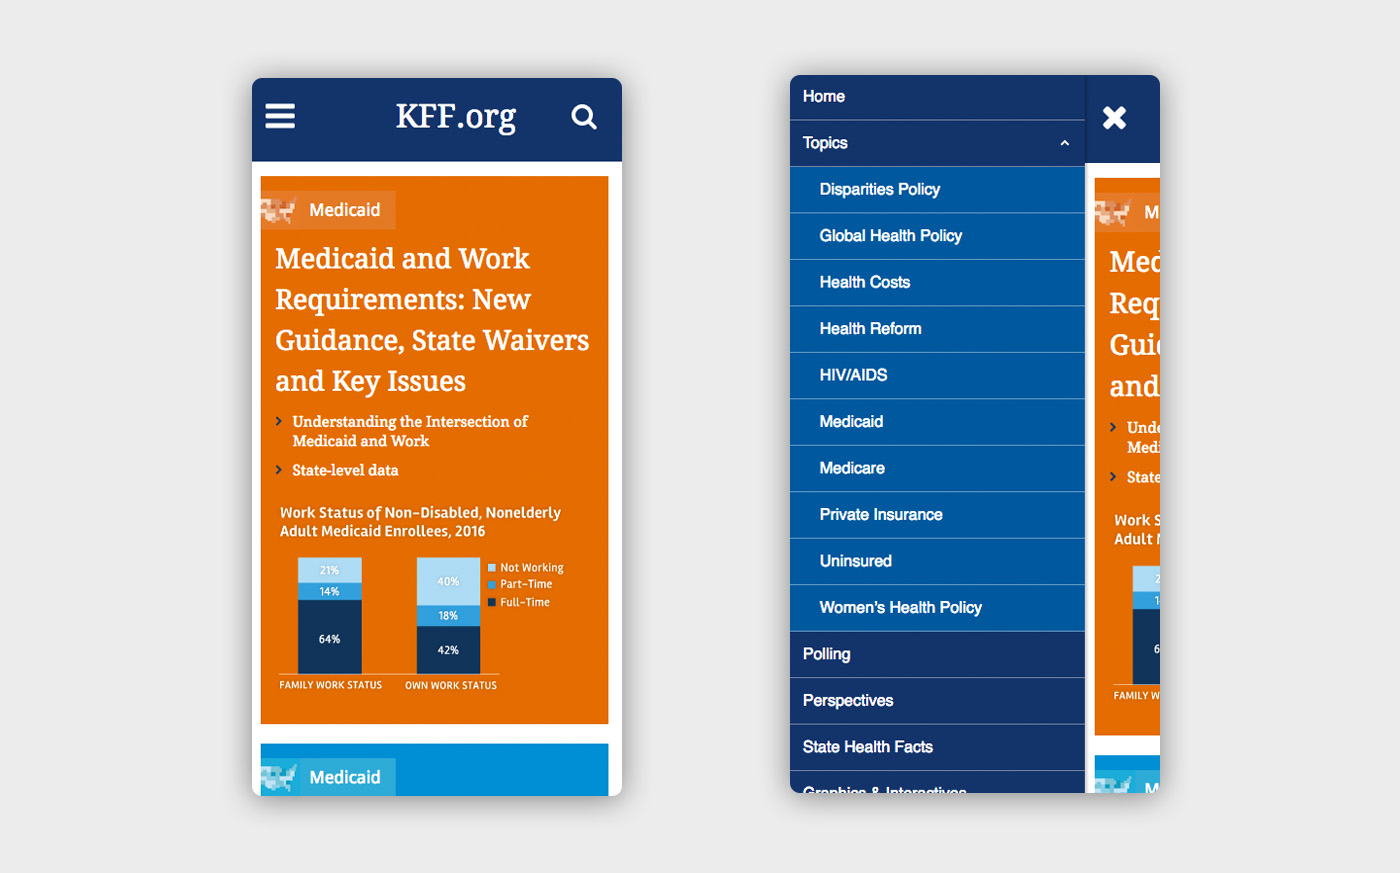 Two views of the mobile site, one displaying the presentation of the home page with a large orange block housing an article, and the other showing the navigation menu with multiple topics in white text on blue